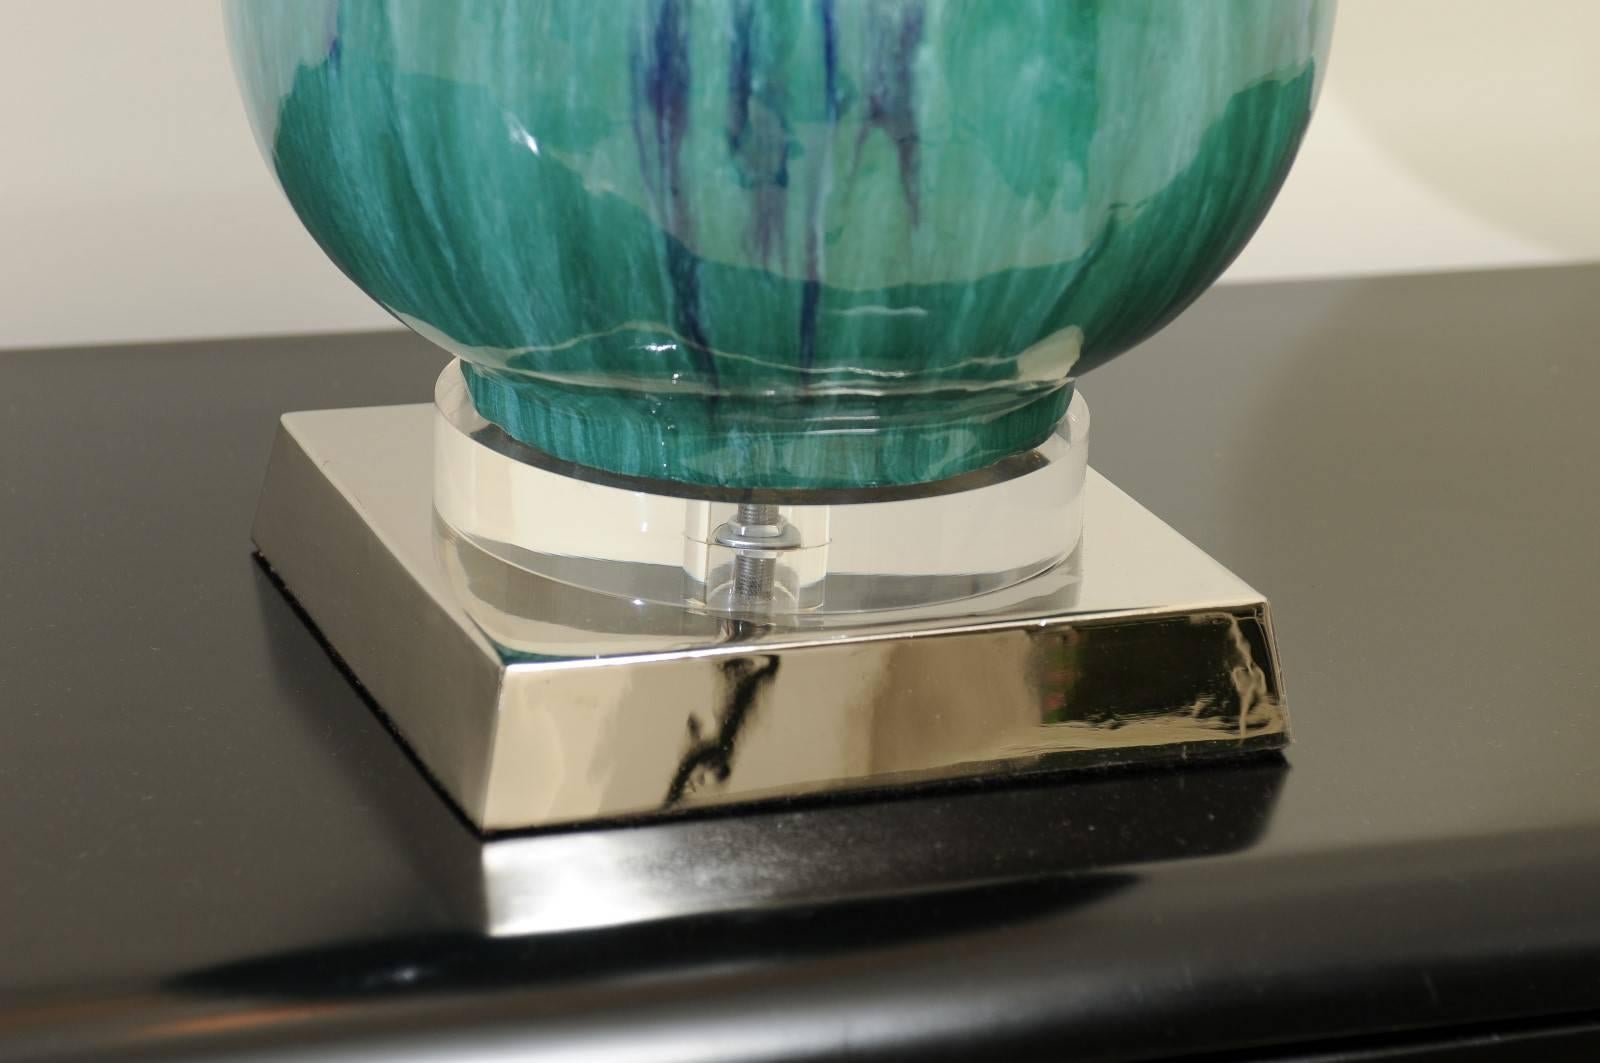 Fantastic Pair of Drip Glaze Gourd Lamps in Turquoise, Teal and Cobalt In Excellent Condition For Sale In Atlanta, GA